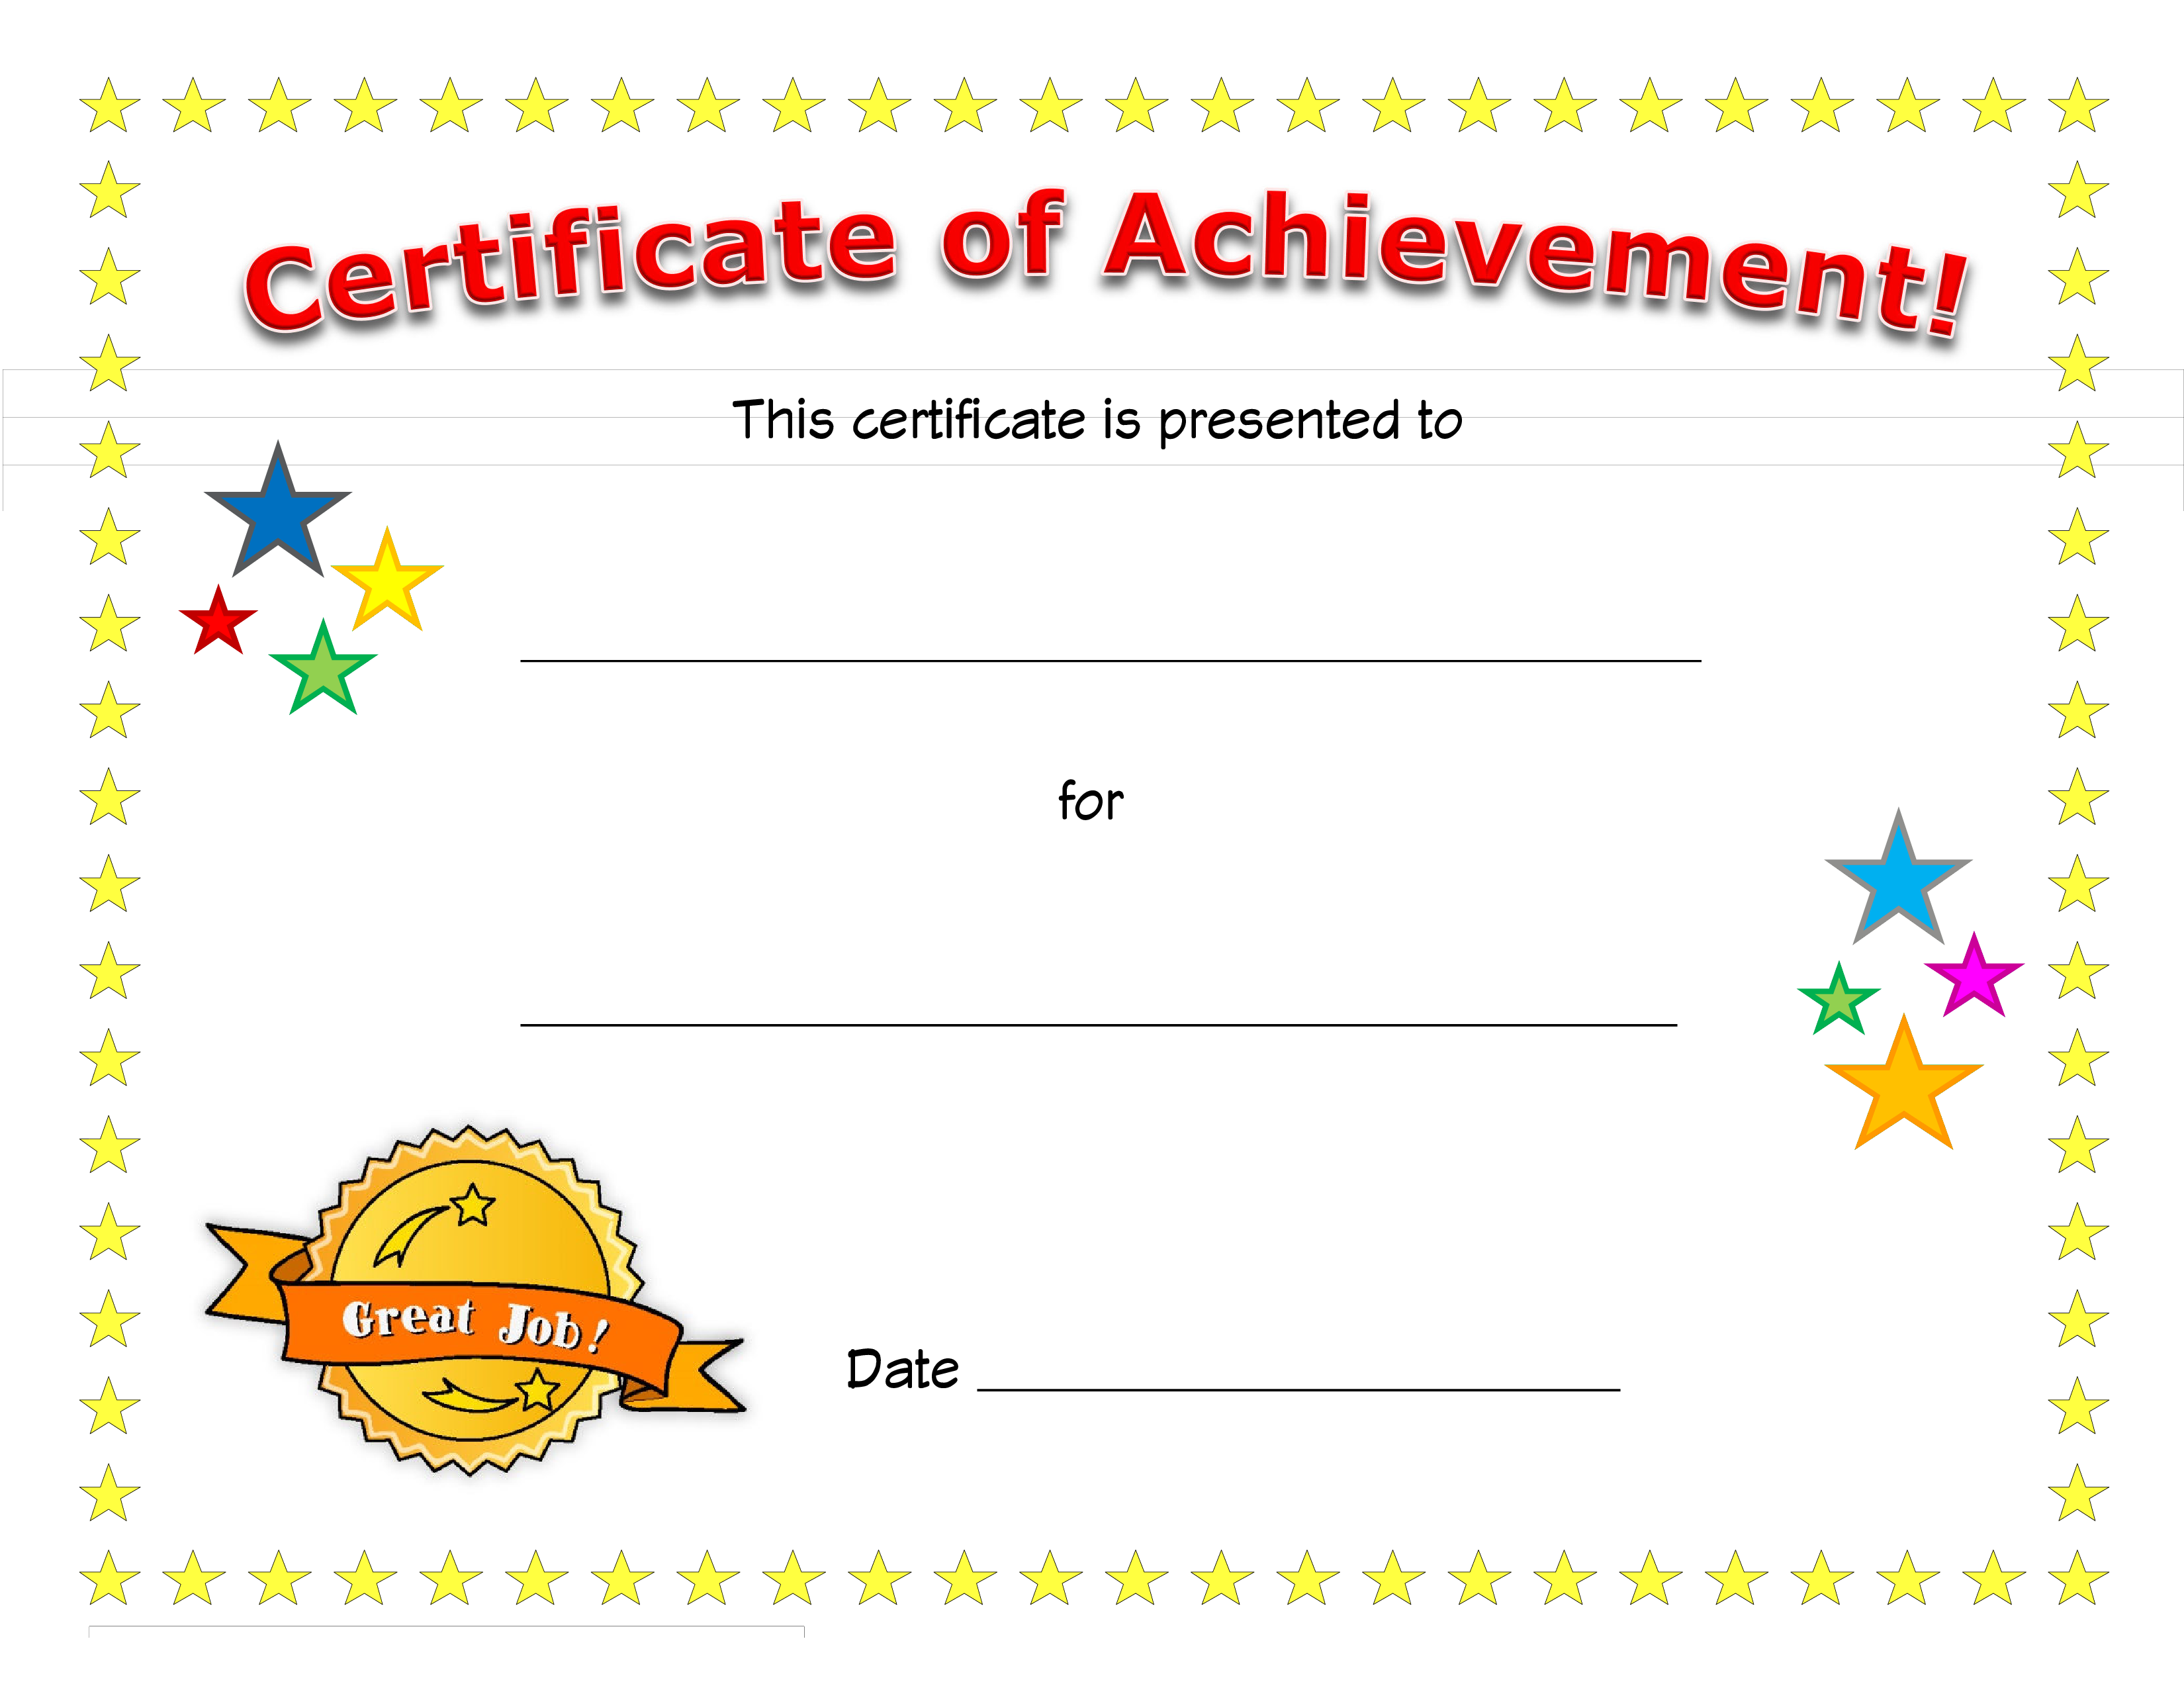 Certificate of achievement template word free clipart images